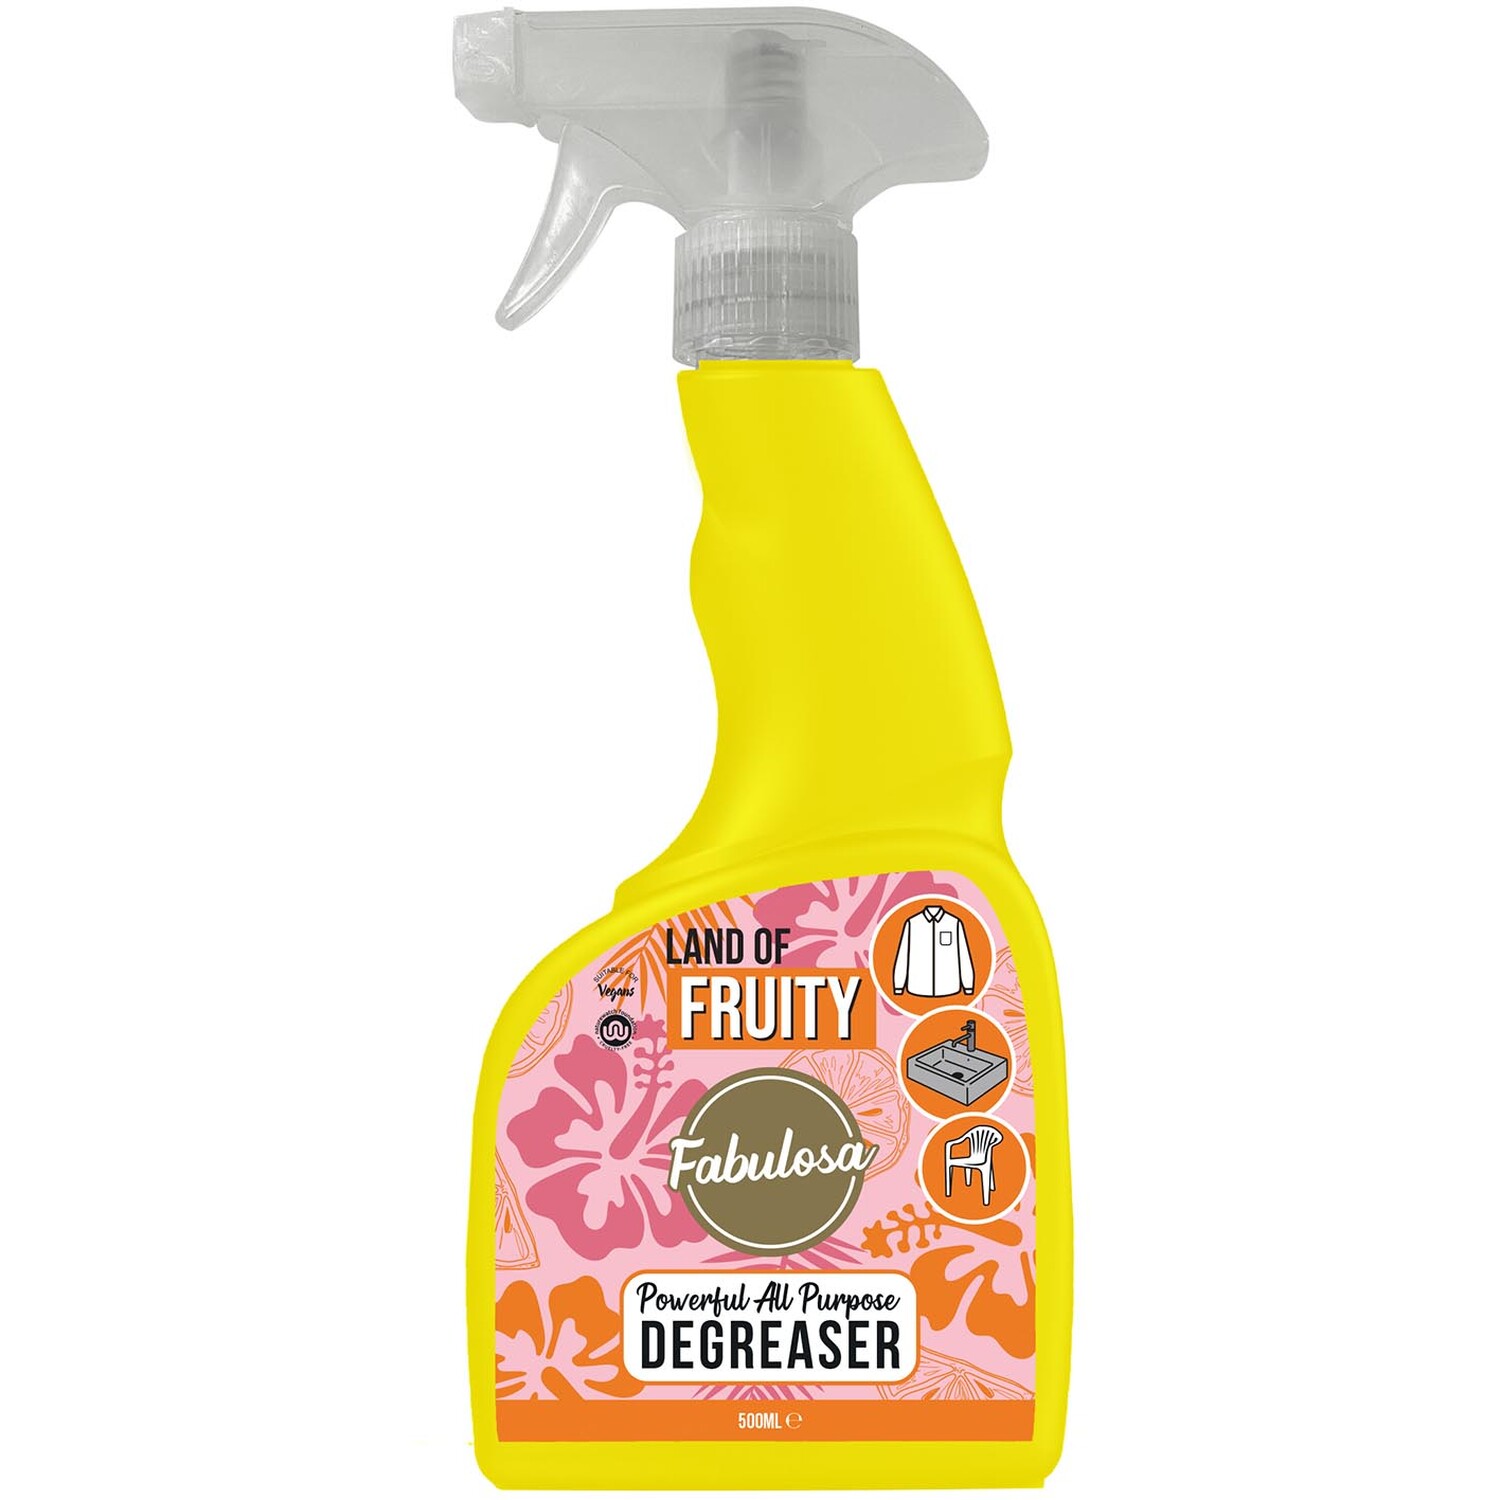 Fabulosa All Purpose Degreaser - Land of Fruity Image